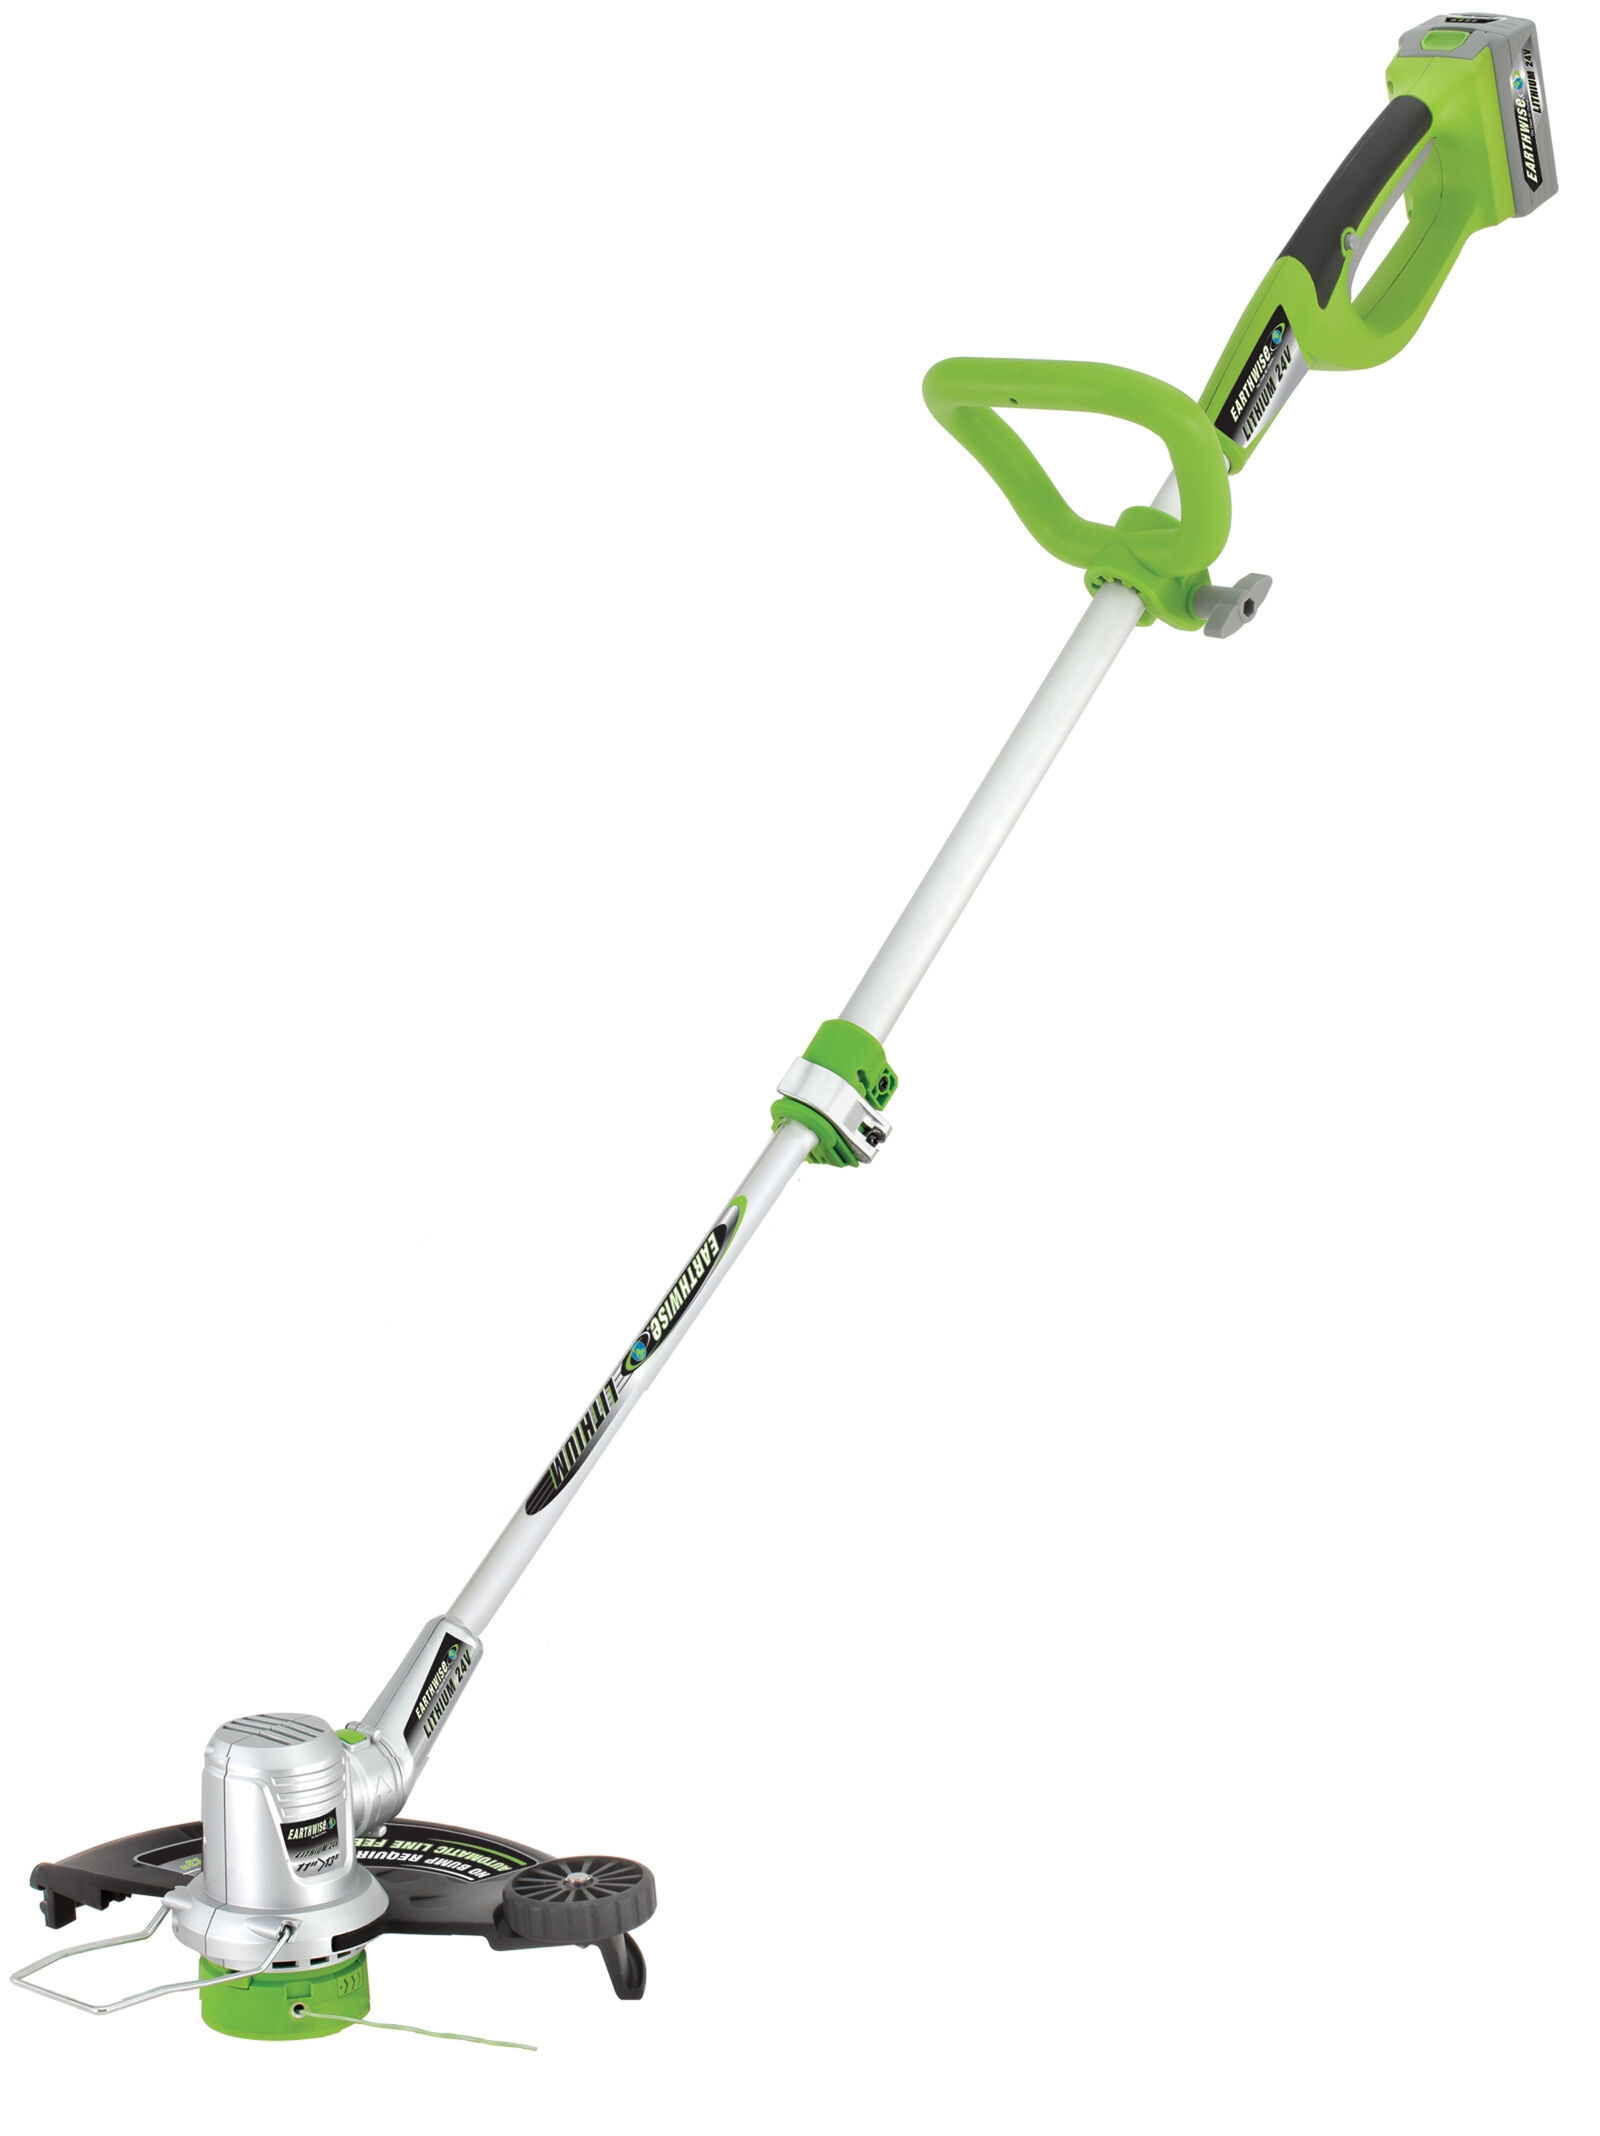 Cordless String Trimmer, 24V by Earthwise | Gardeners.com